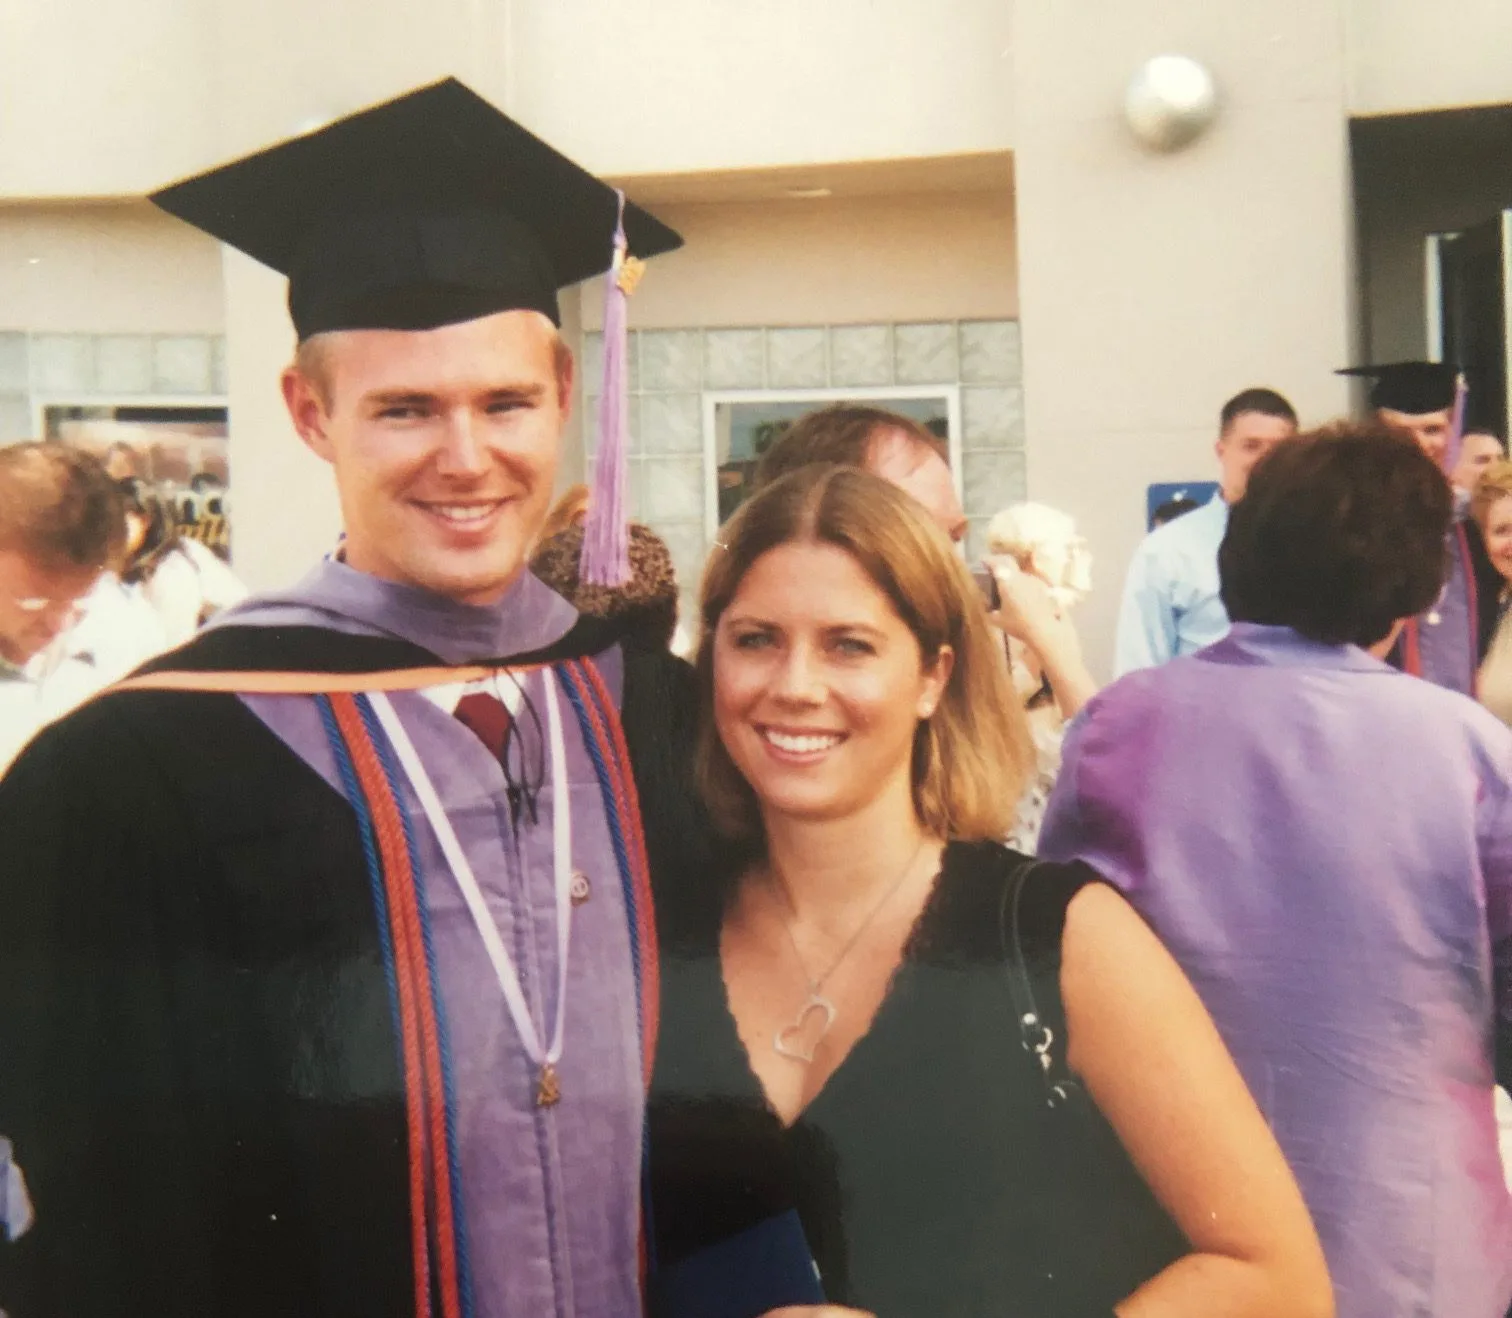 Dr. Ryan with his wife at graduation